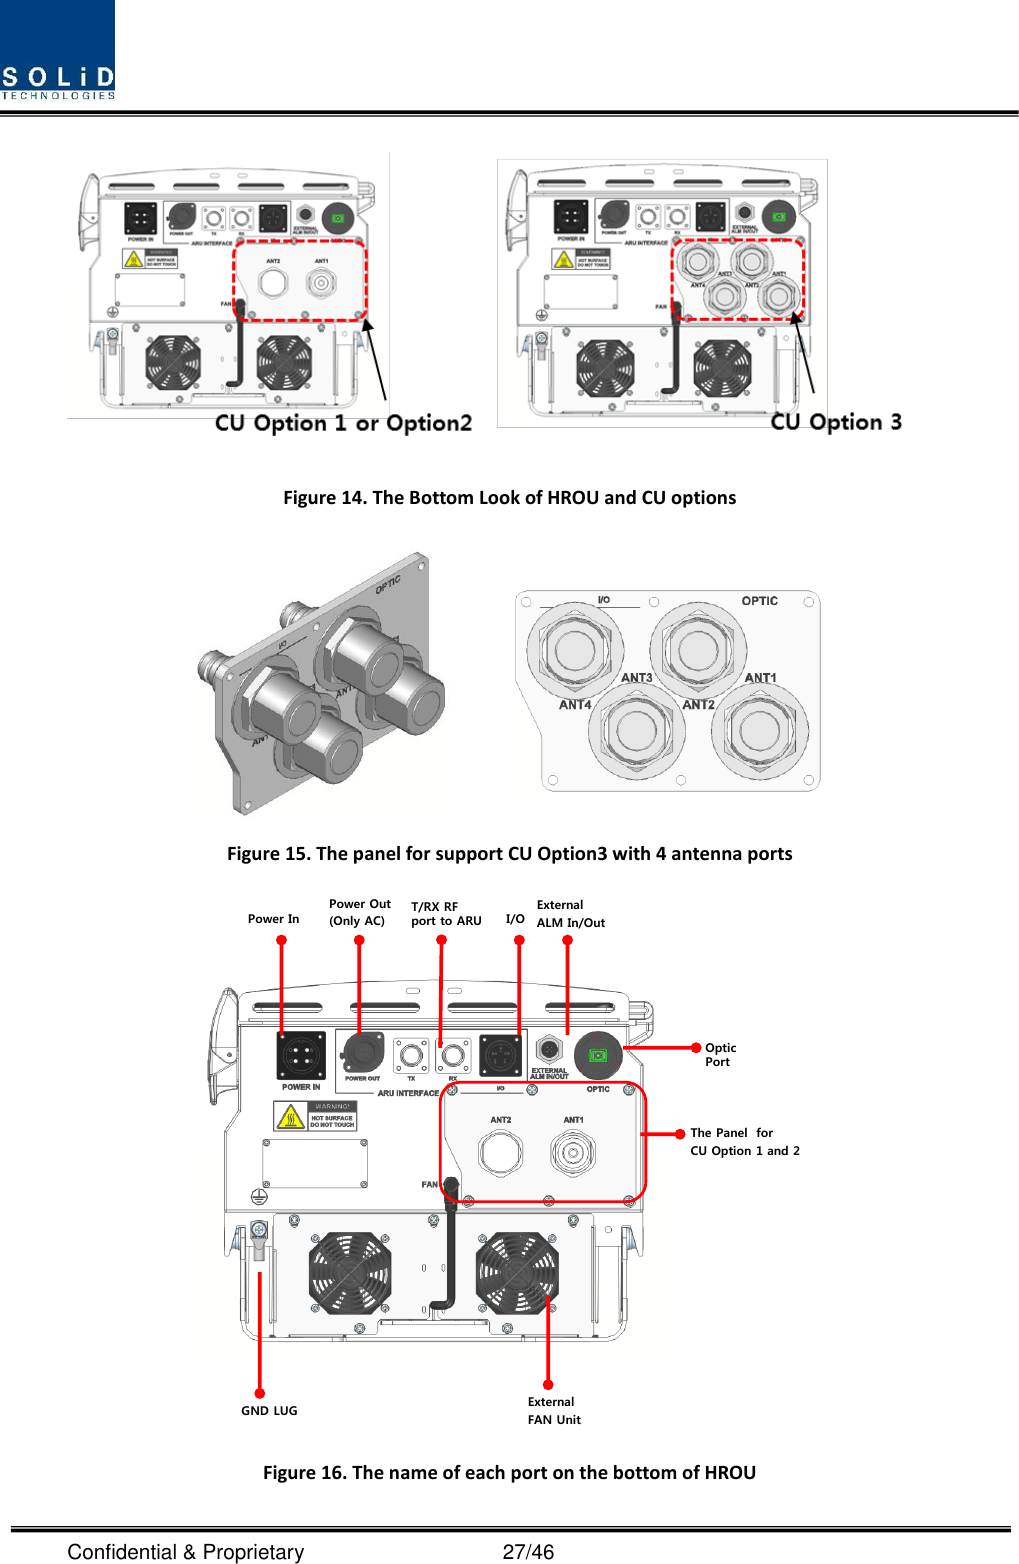  Confidential &amp; Proprietary                                      27/46  Figure 14. The Bottom Look of HROU and CU options  Figure 15. The panel for support CU Option3 with 4 antenna ports  Figure 16. The name of each port on the bottom of HROU  Power InPower Out(Only AC)T/RX RF port to ARU  I/OExternalALM In/OutExternalFAN UnitGND LUG Optic PortThe Panel  for CU Option 1 and 2